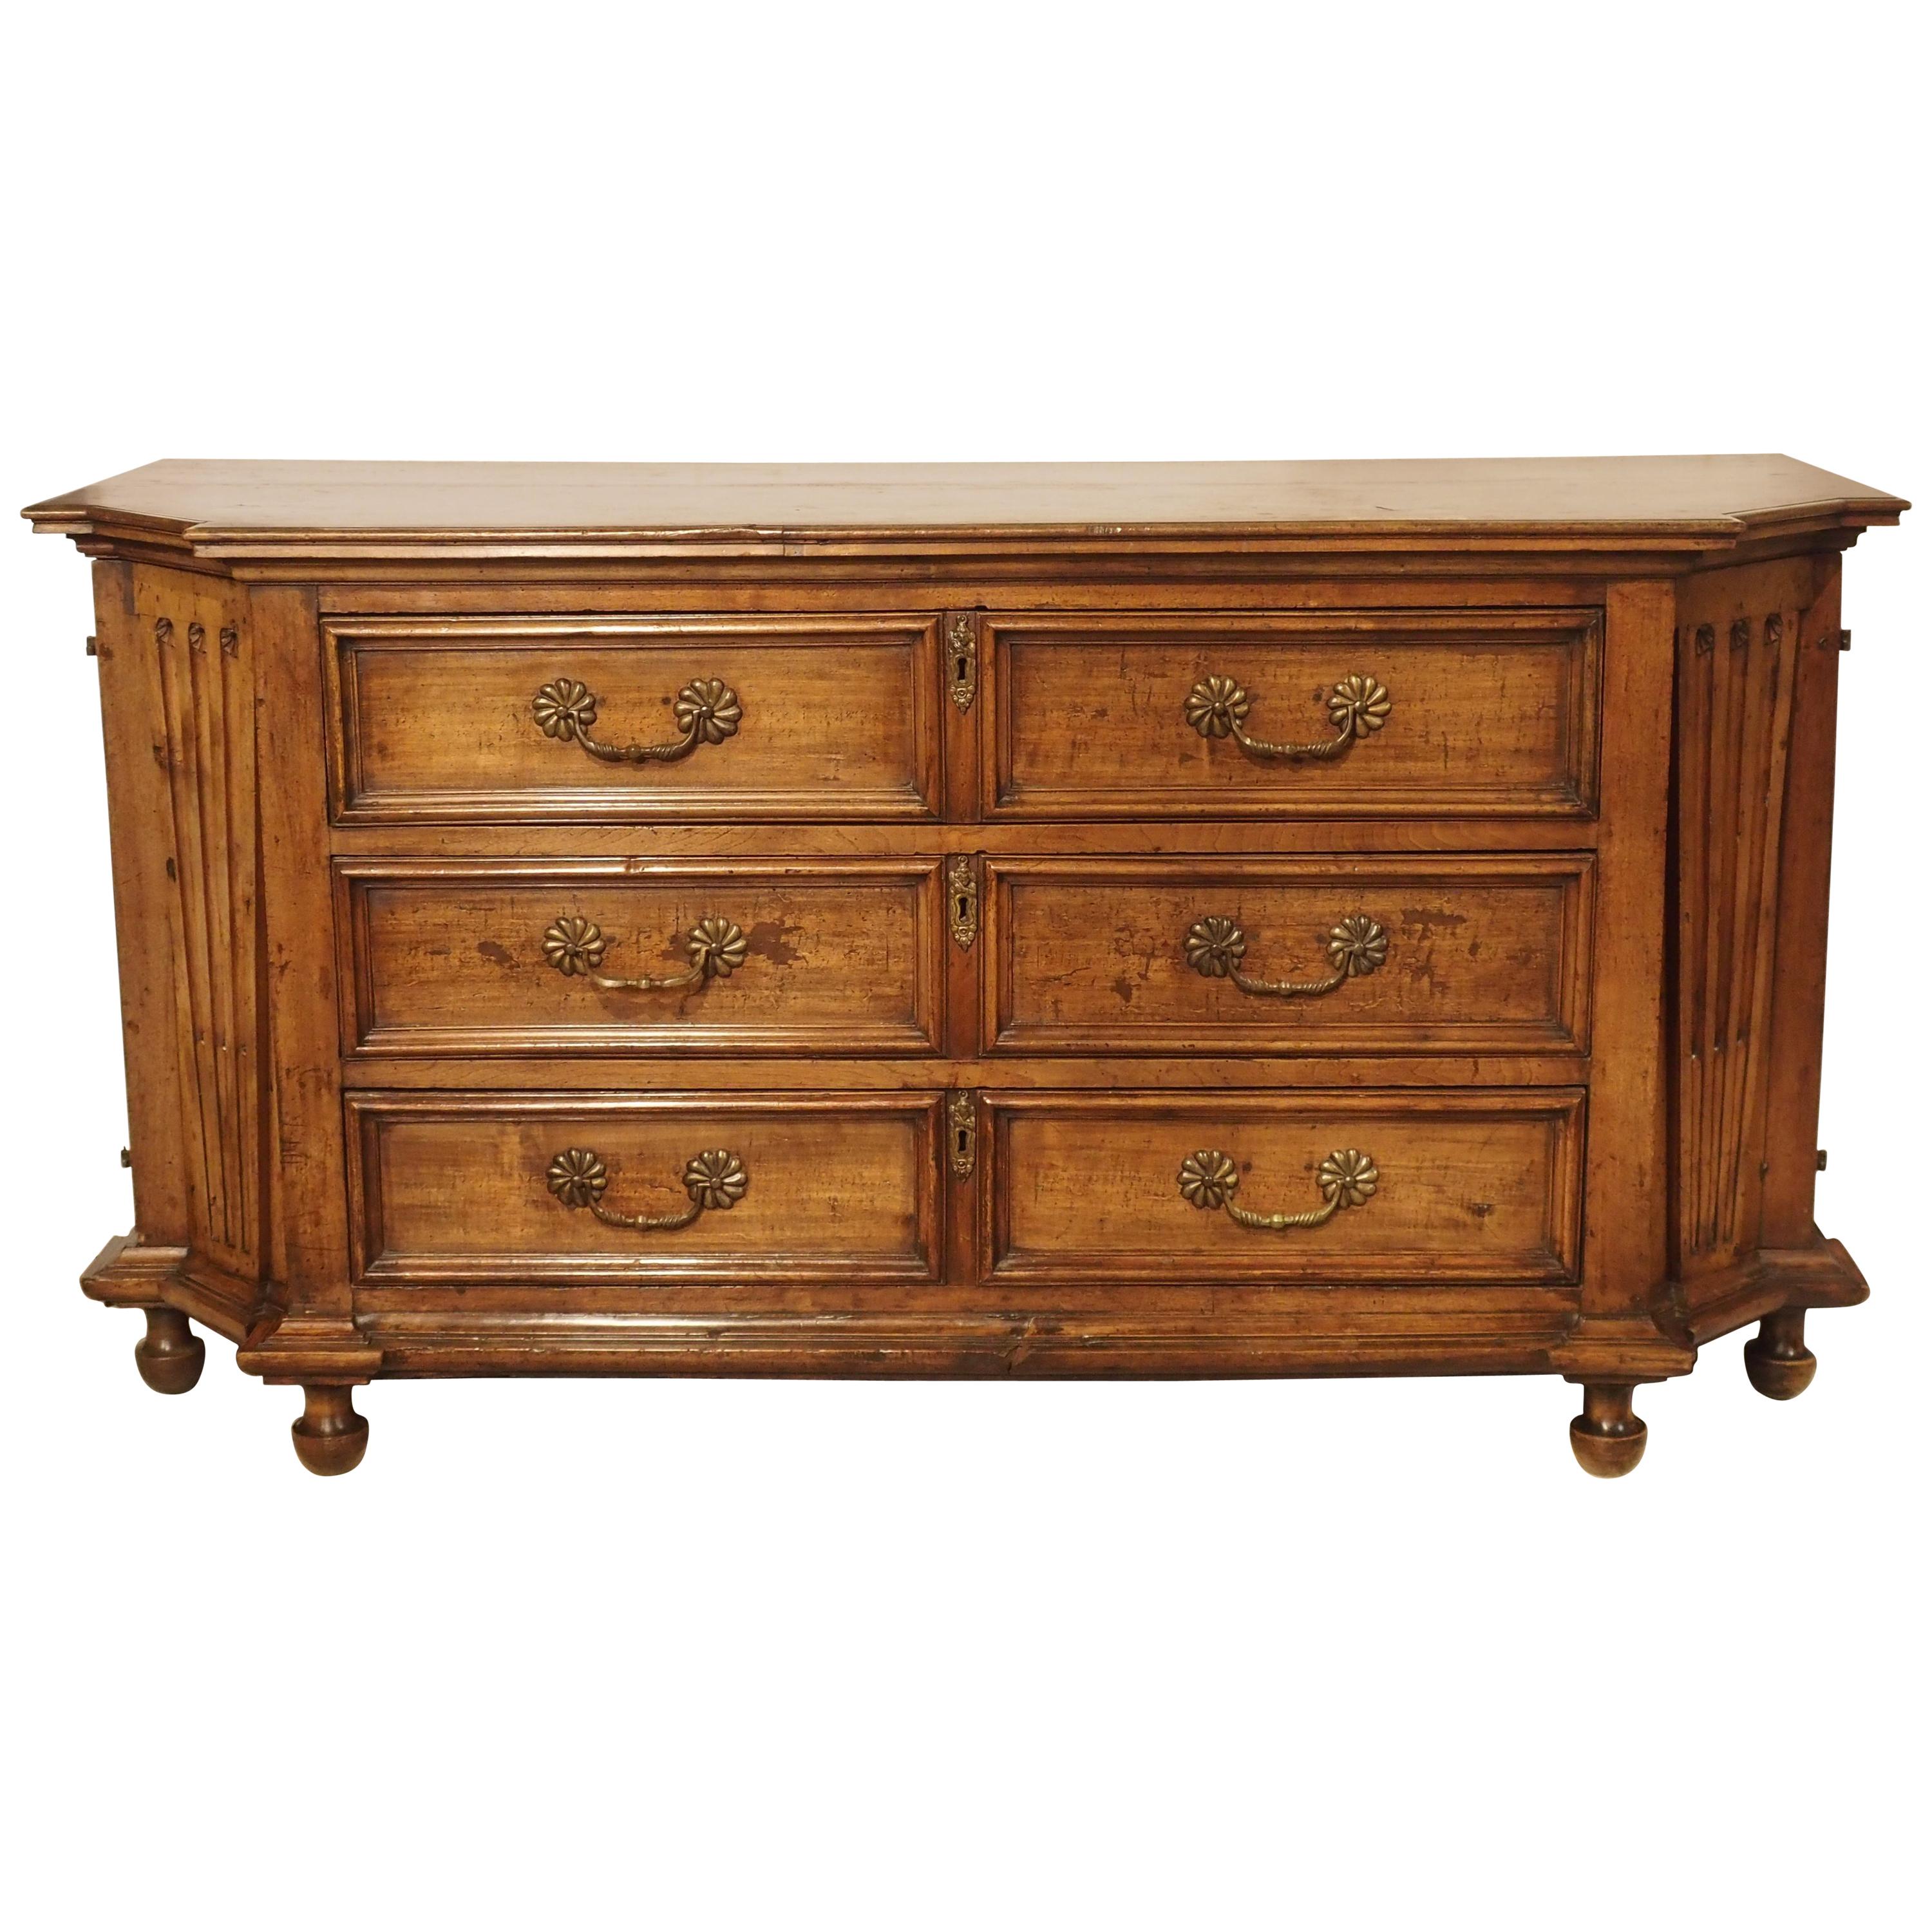 Large Antique Tuscan Walnut Commode with Side Compartments, Early 1800s